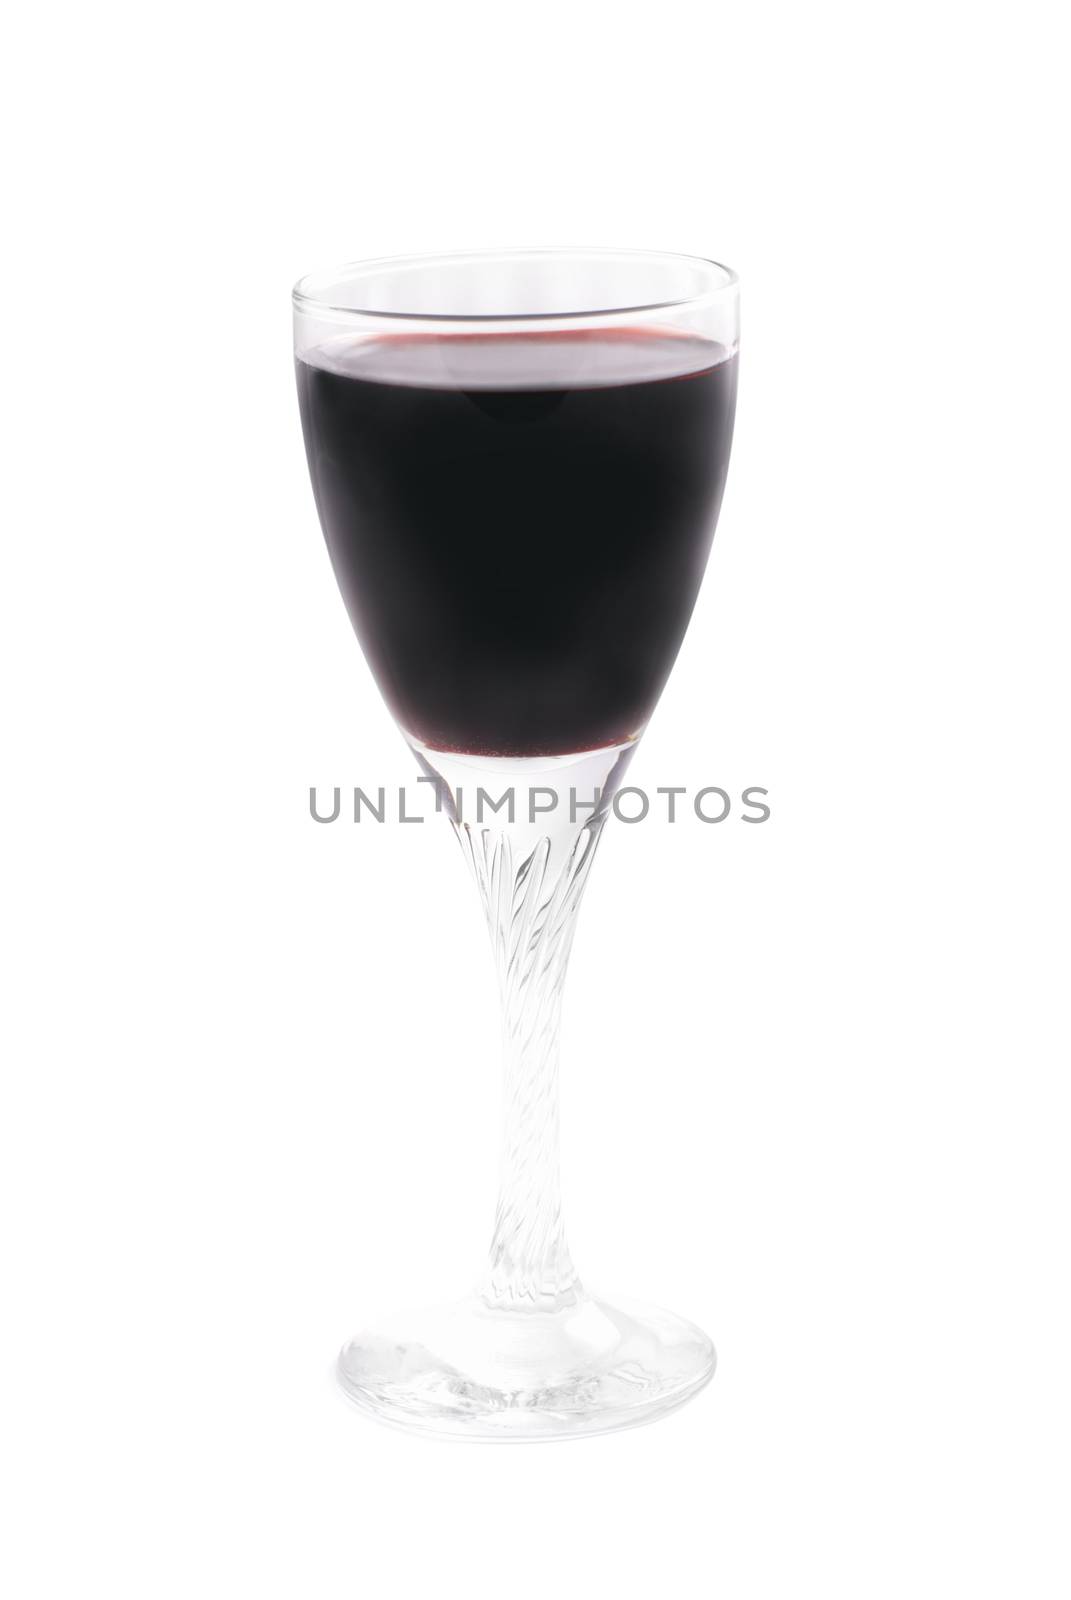 Glass with red wine with clipping path isolated on white background